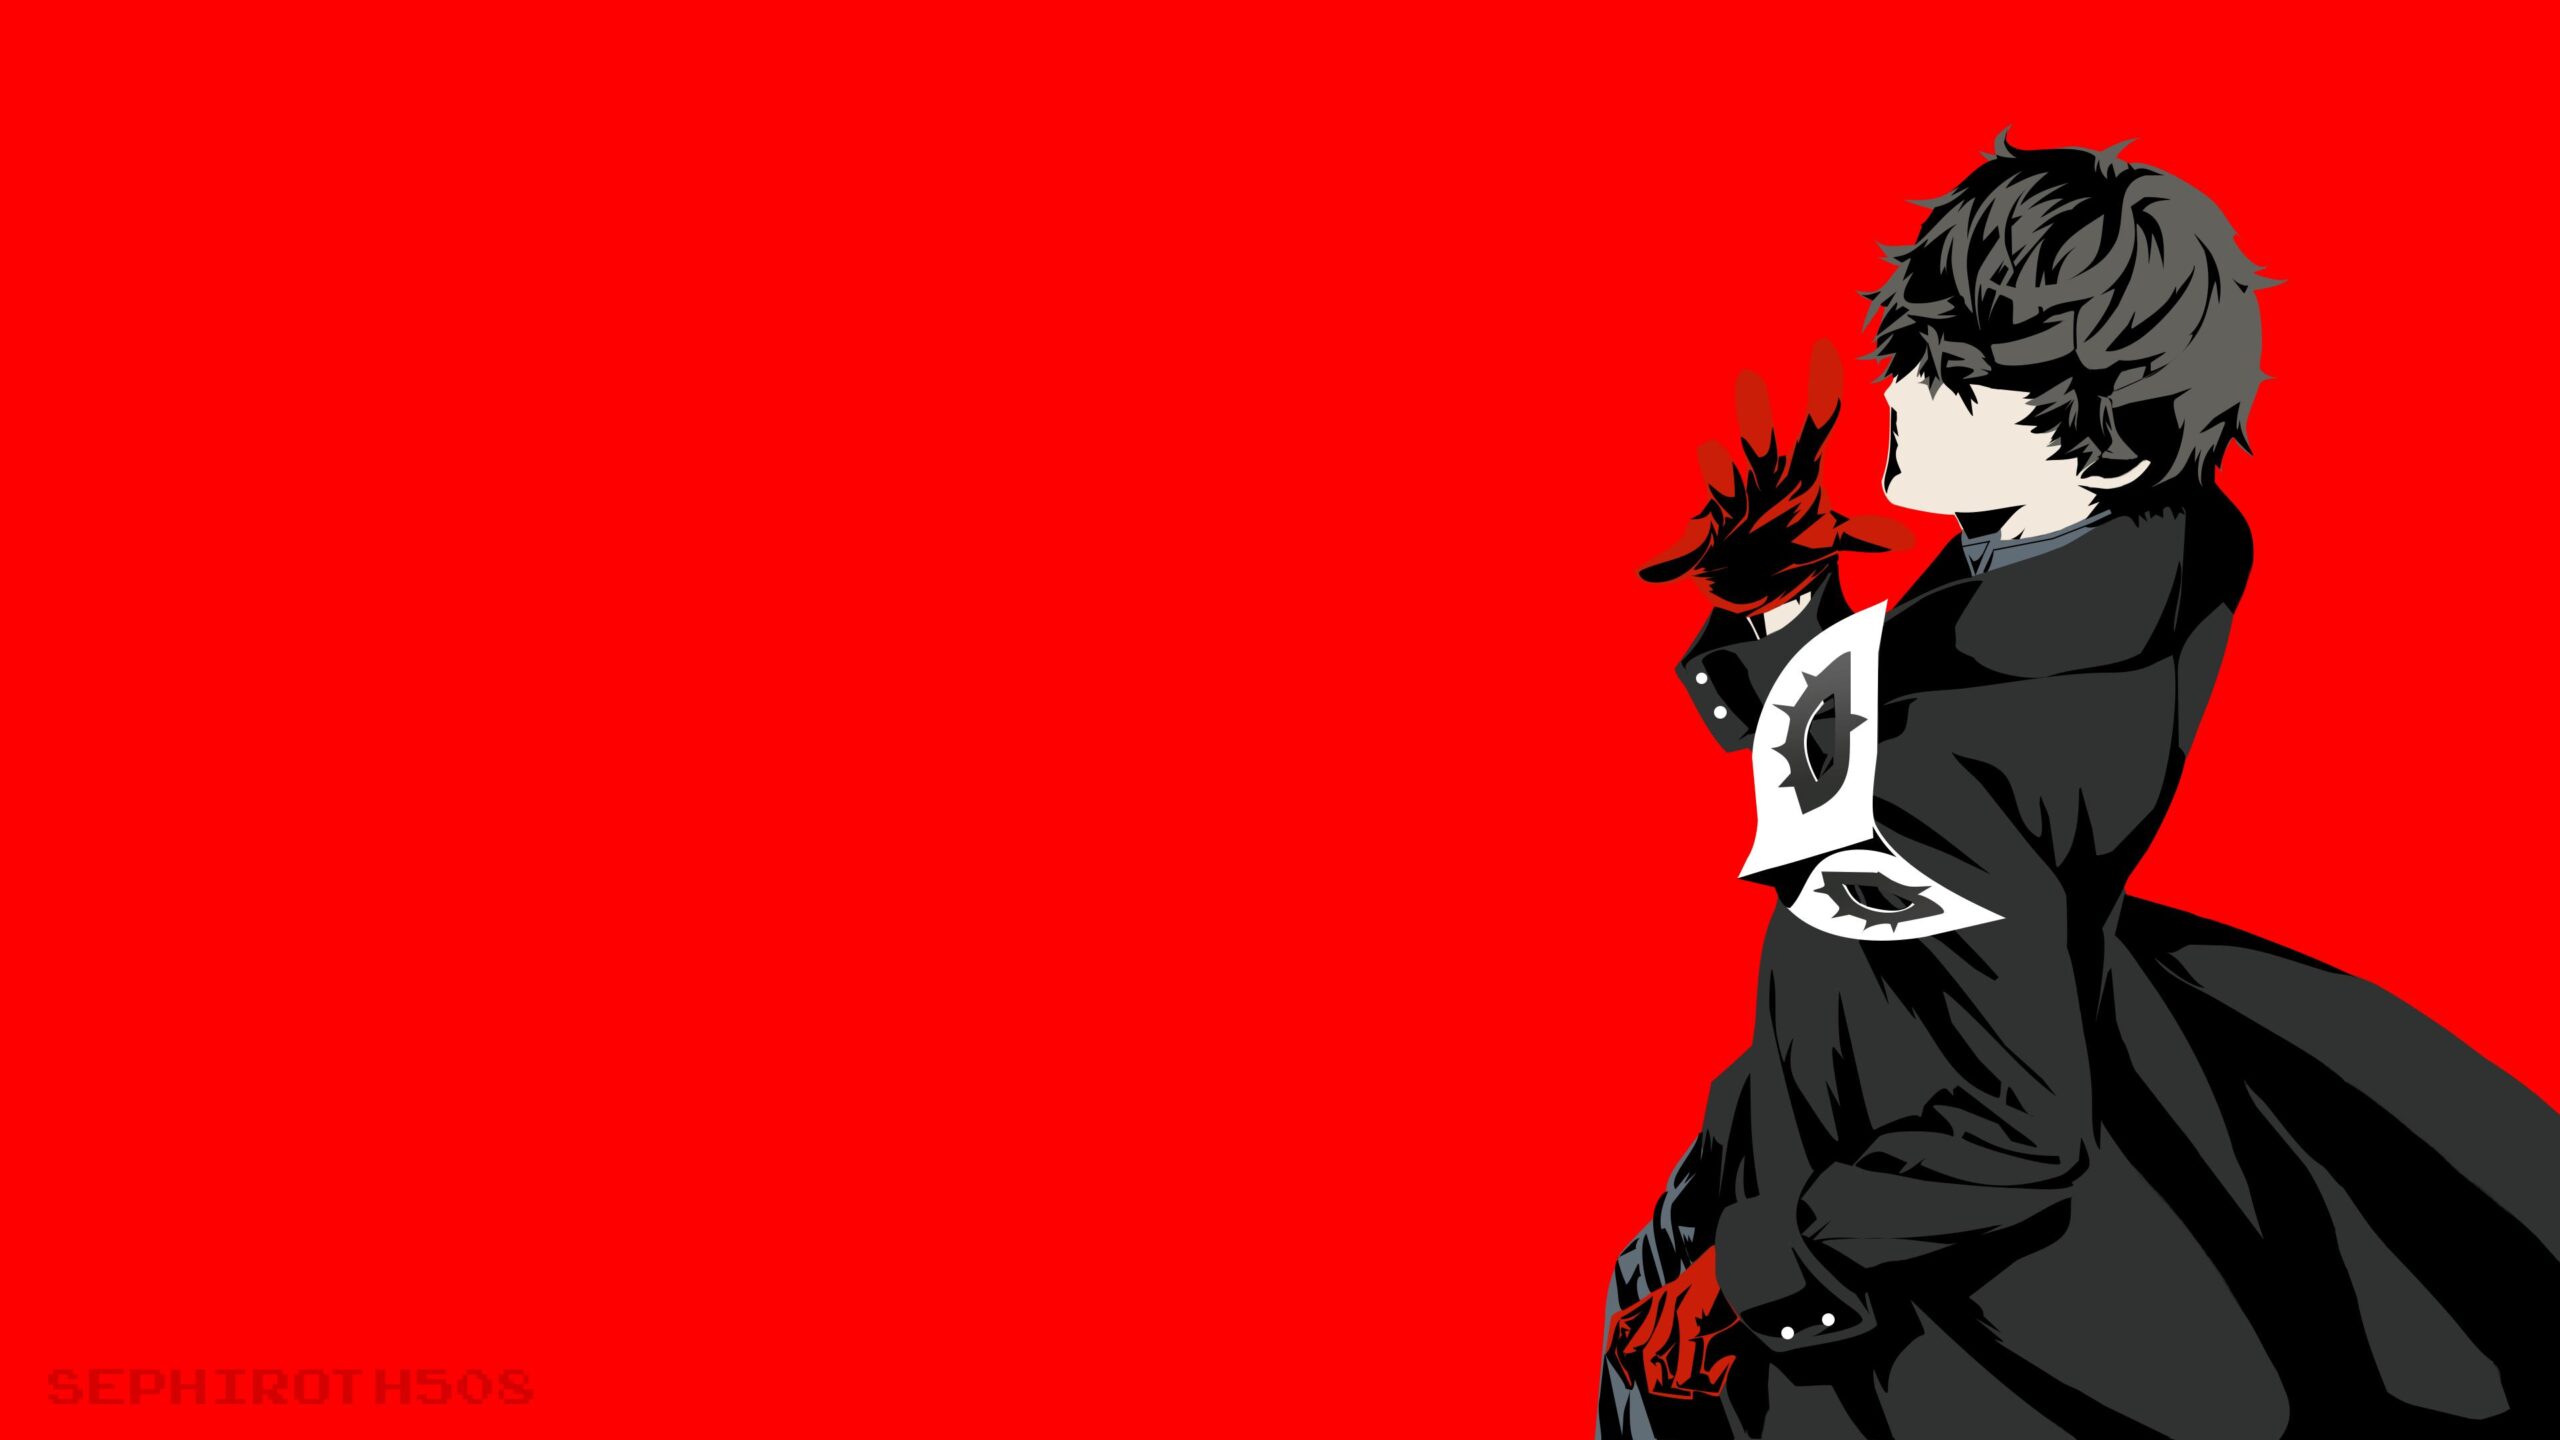 Persona 5 Hd Full Wallpapers